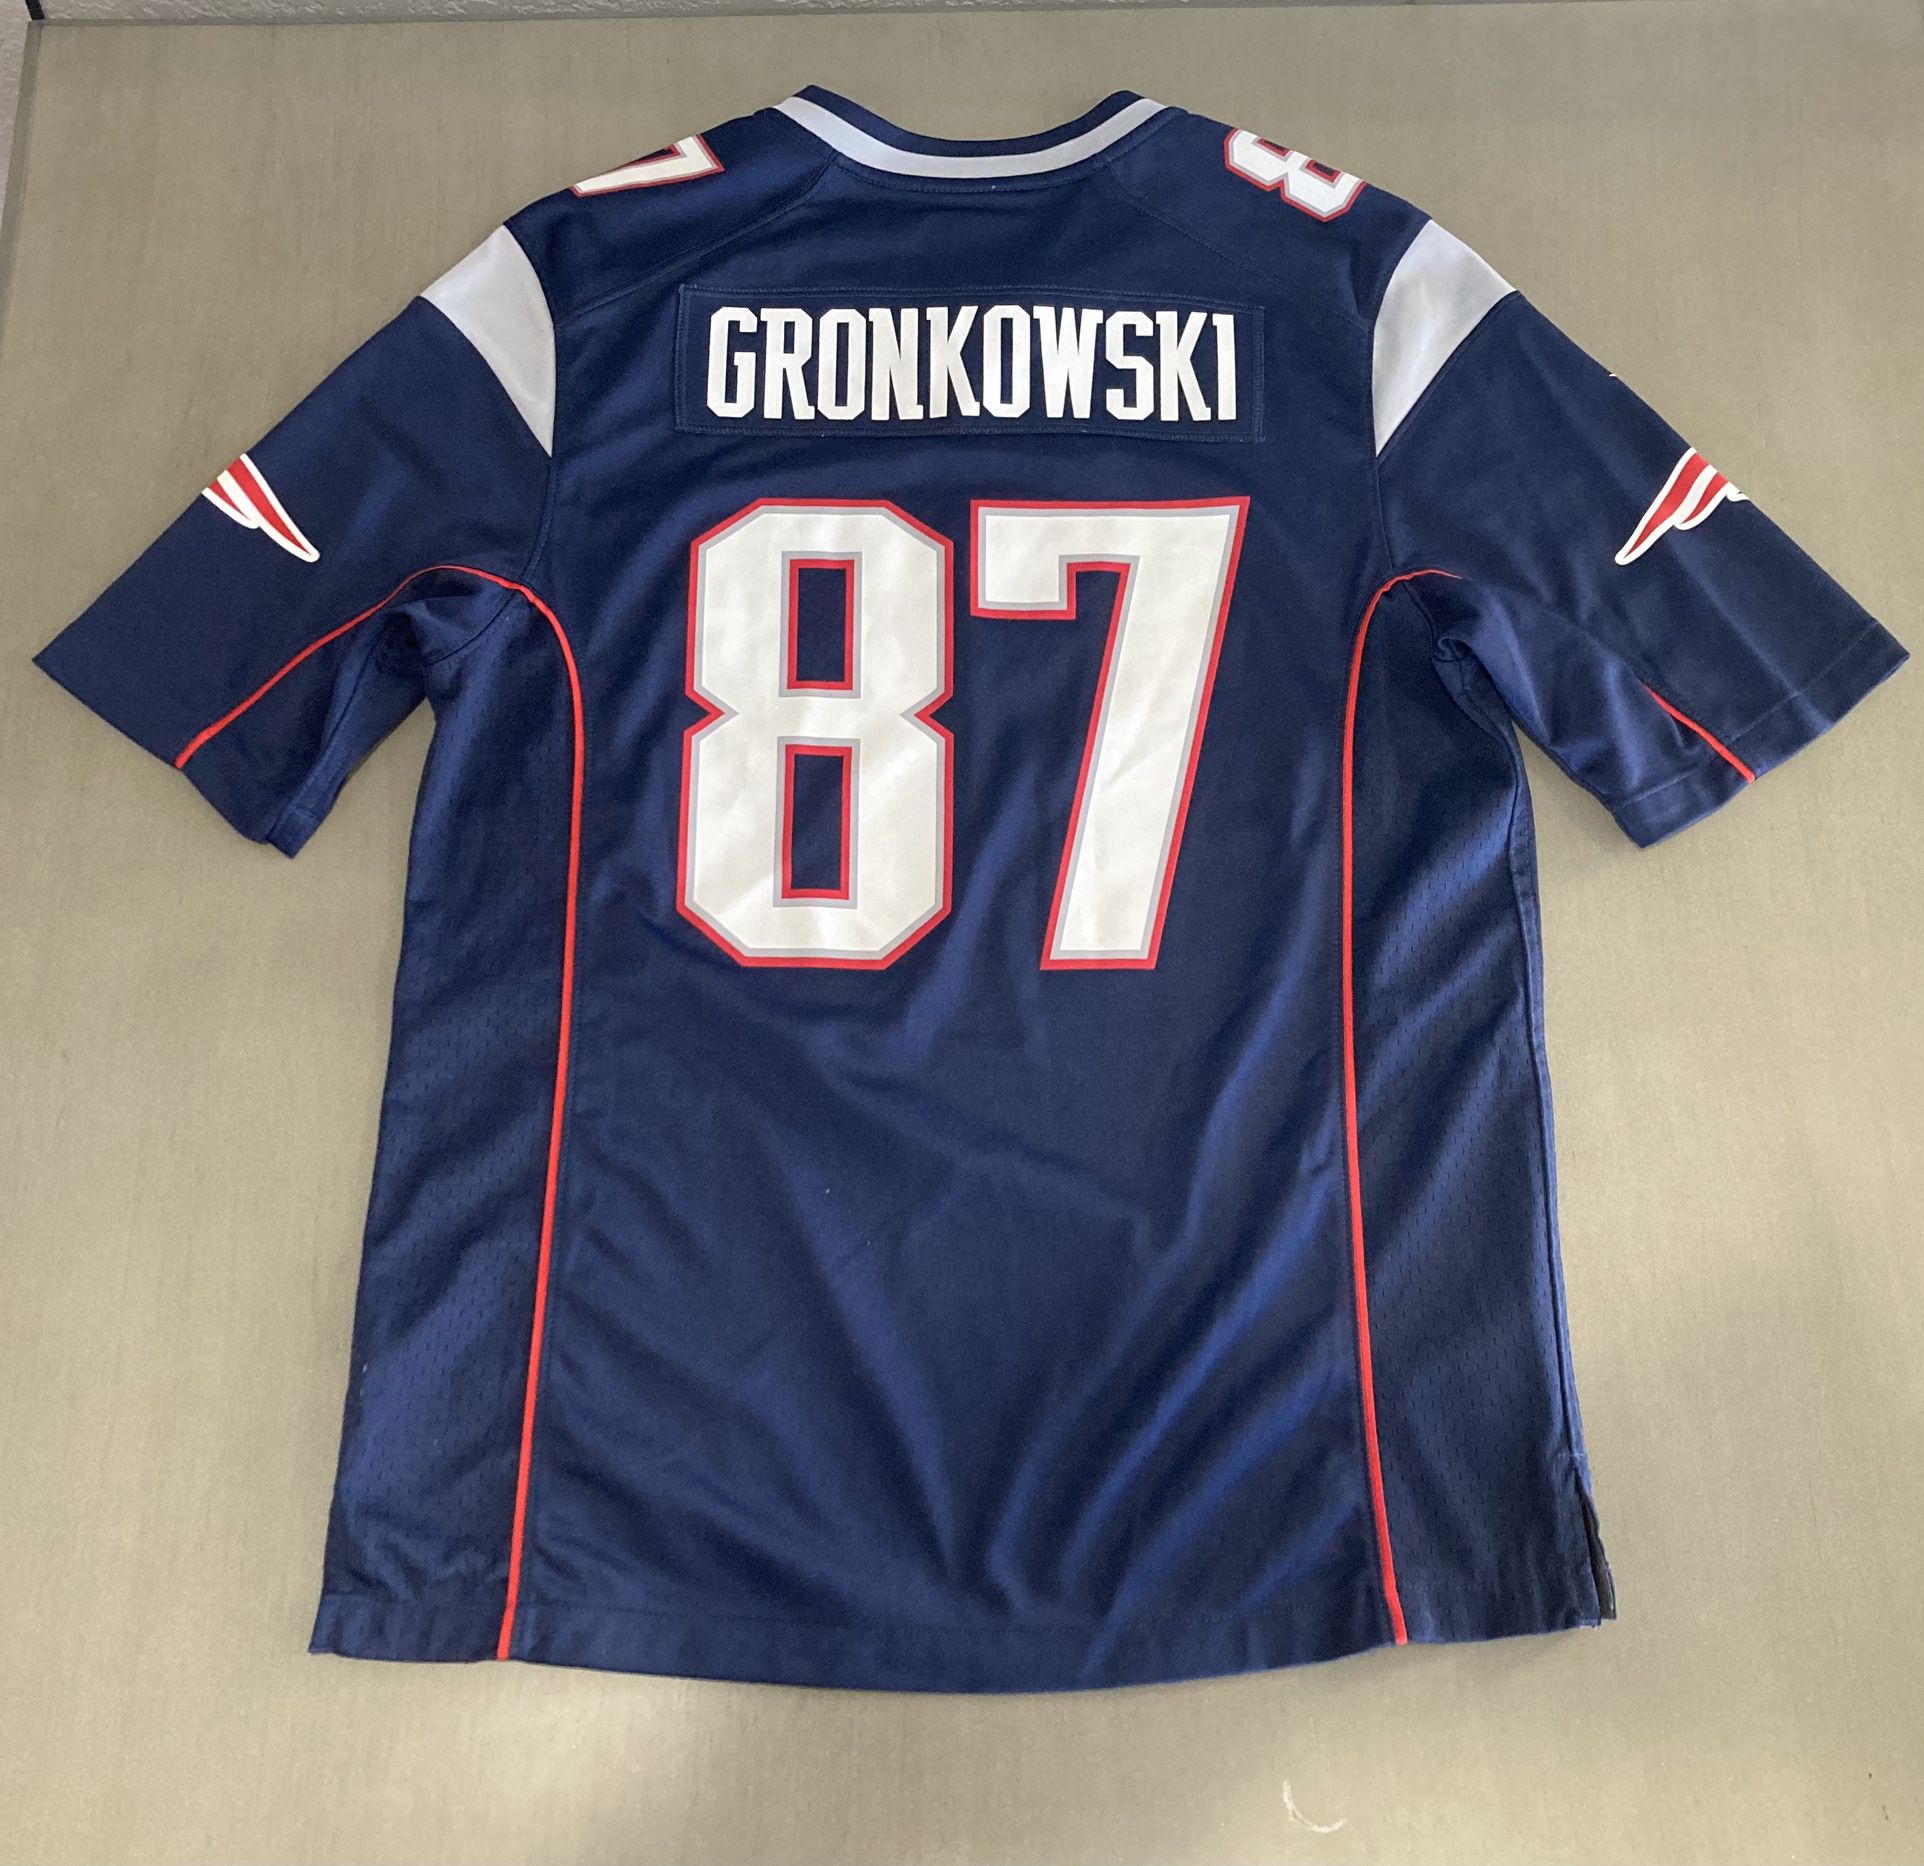 Gronk New England Patriots Jersey 